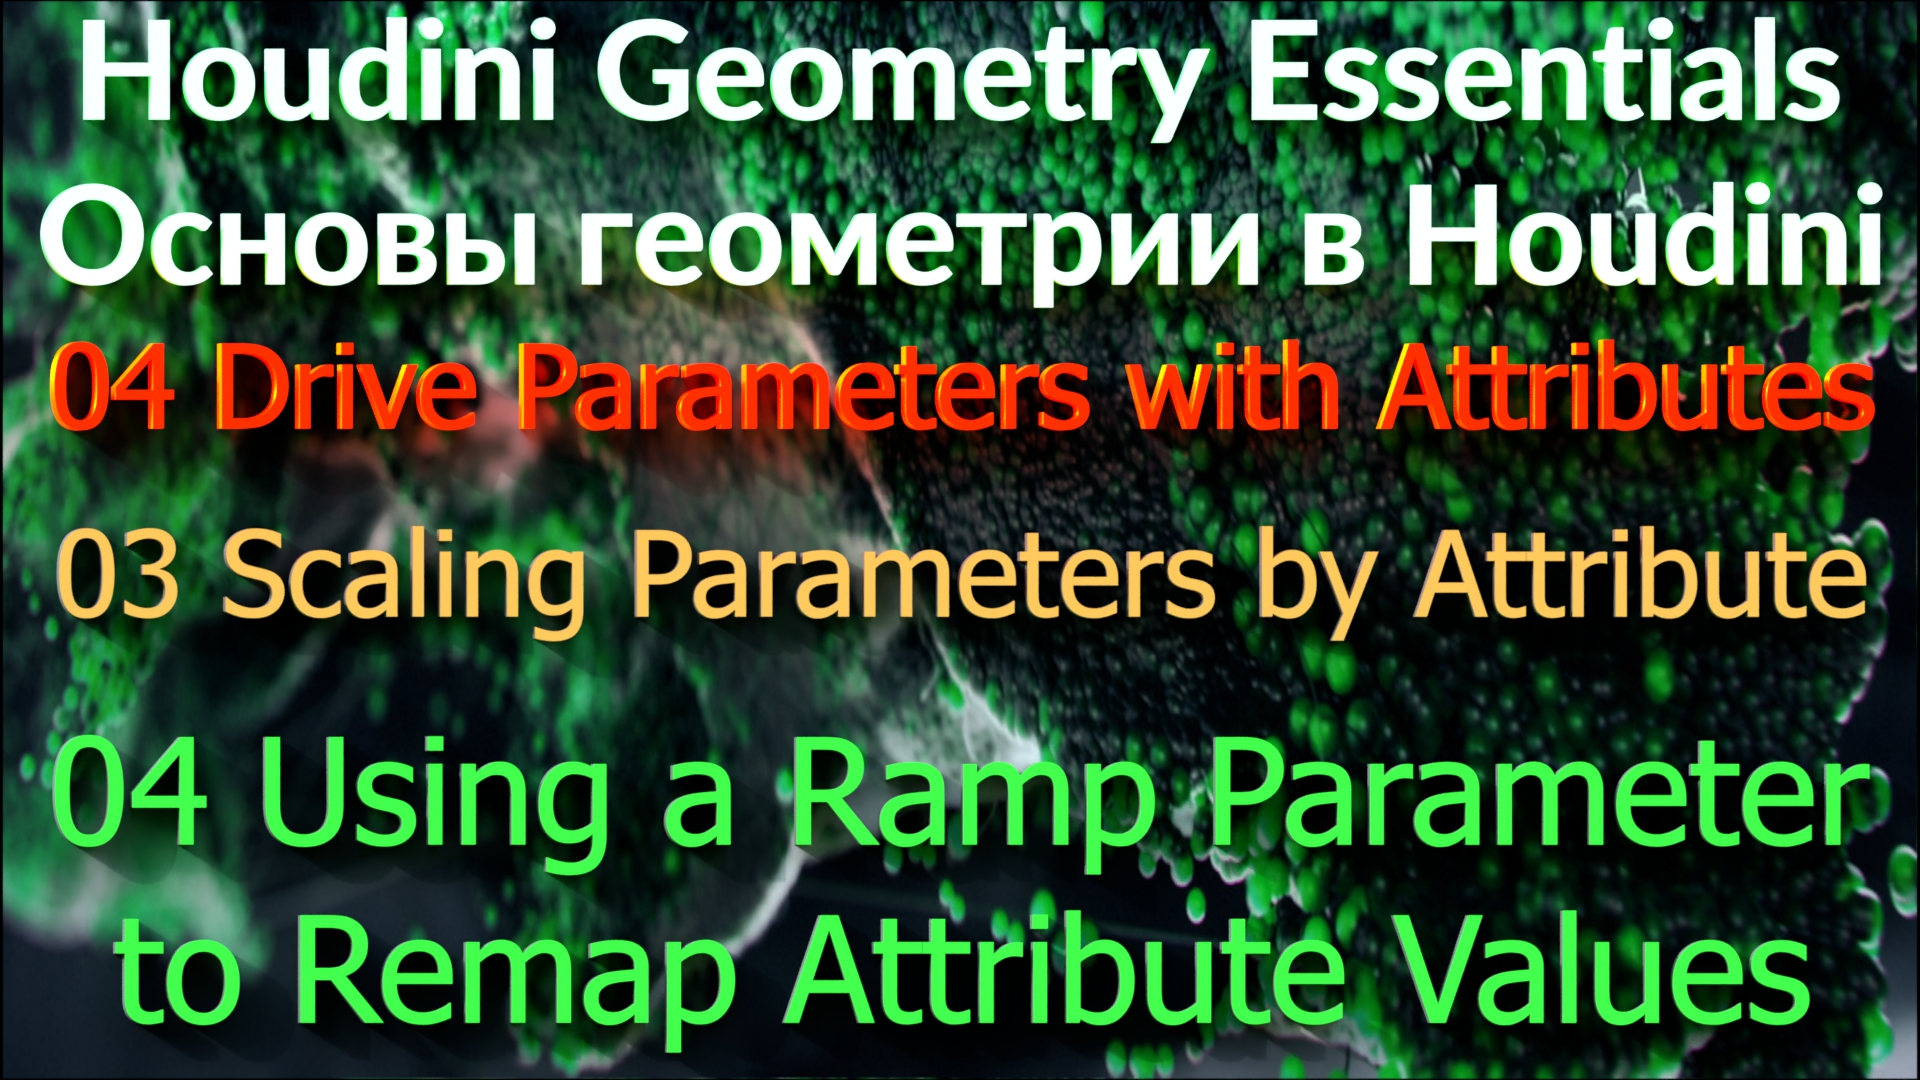 04_03_04 Using a Ramp Parameter to Remap Attribute Values